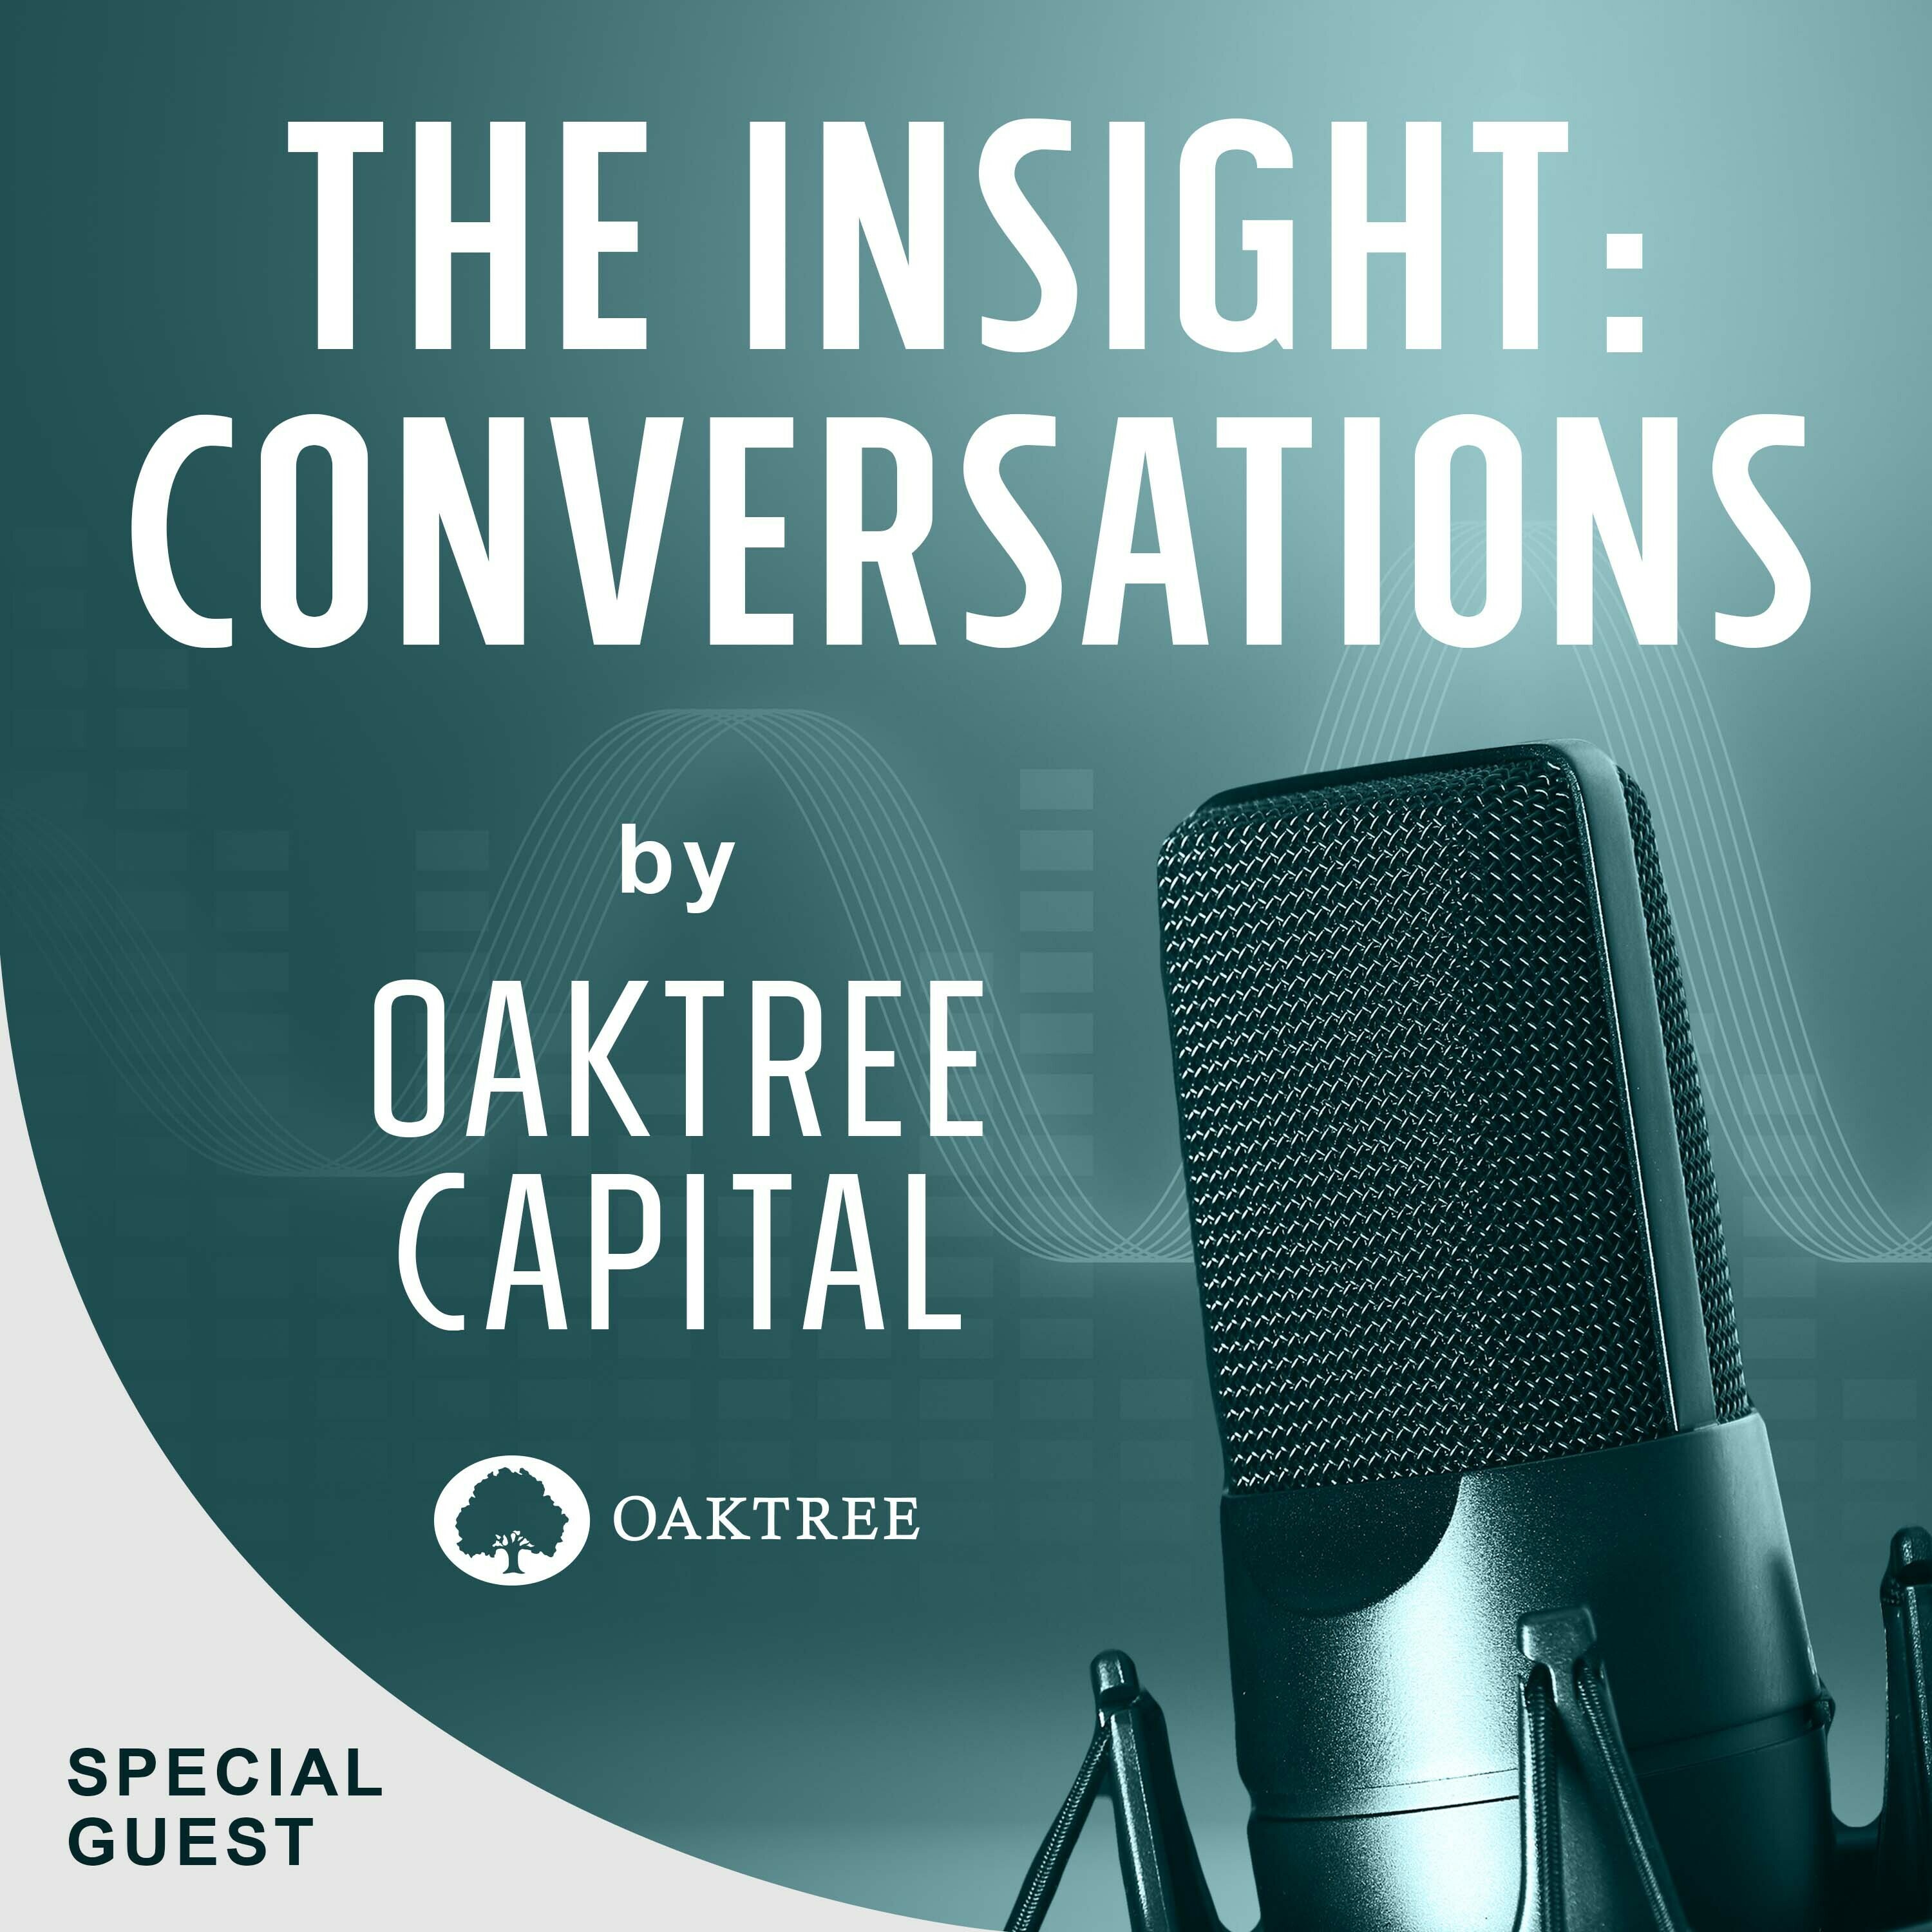 The Insight: Conversations – Special Episode with Annie Duke and Howard Marks